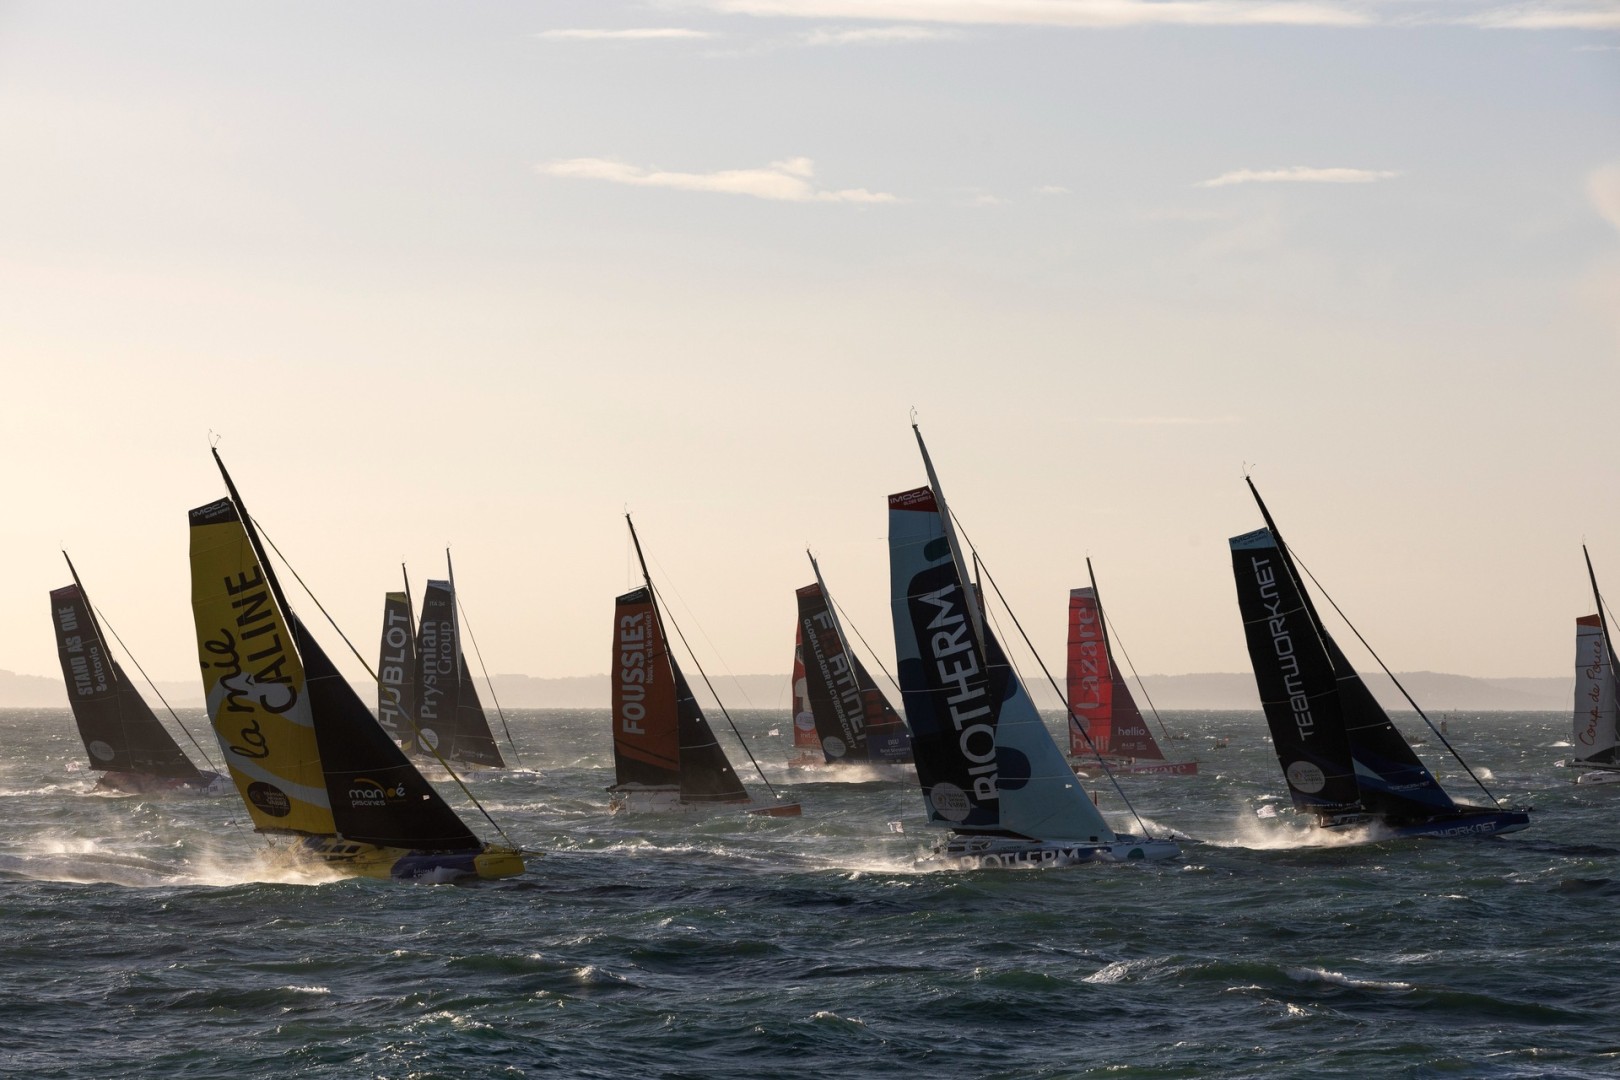 TJV Normandie le Havre, 24 hours that changed the face of the race